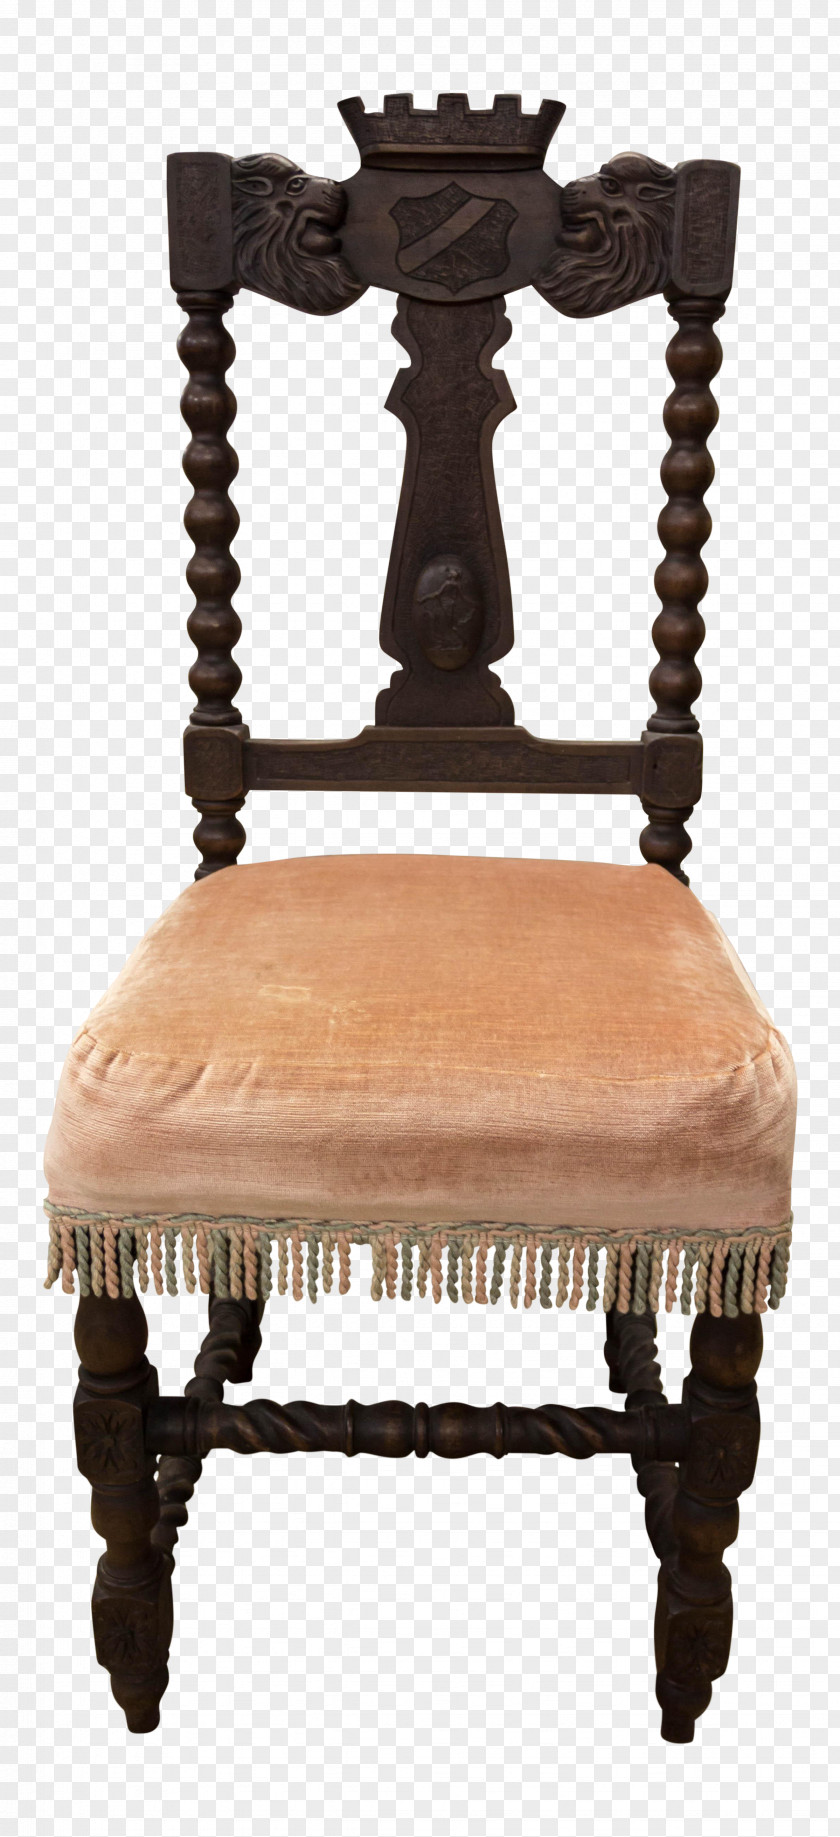 Mahogany Chair Antique PNG